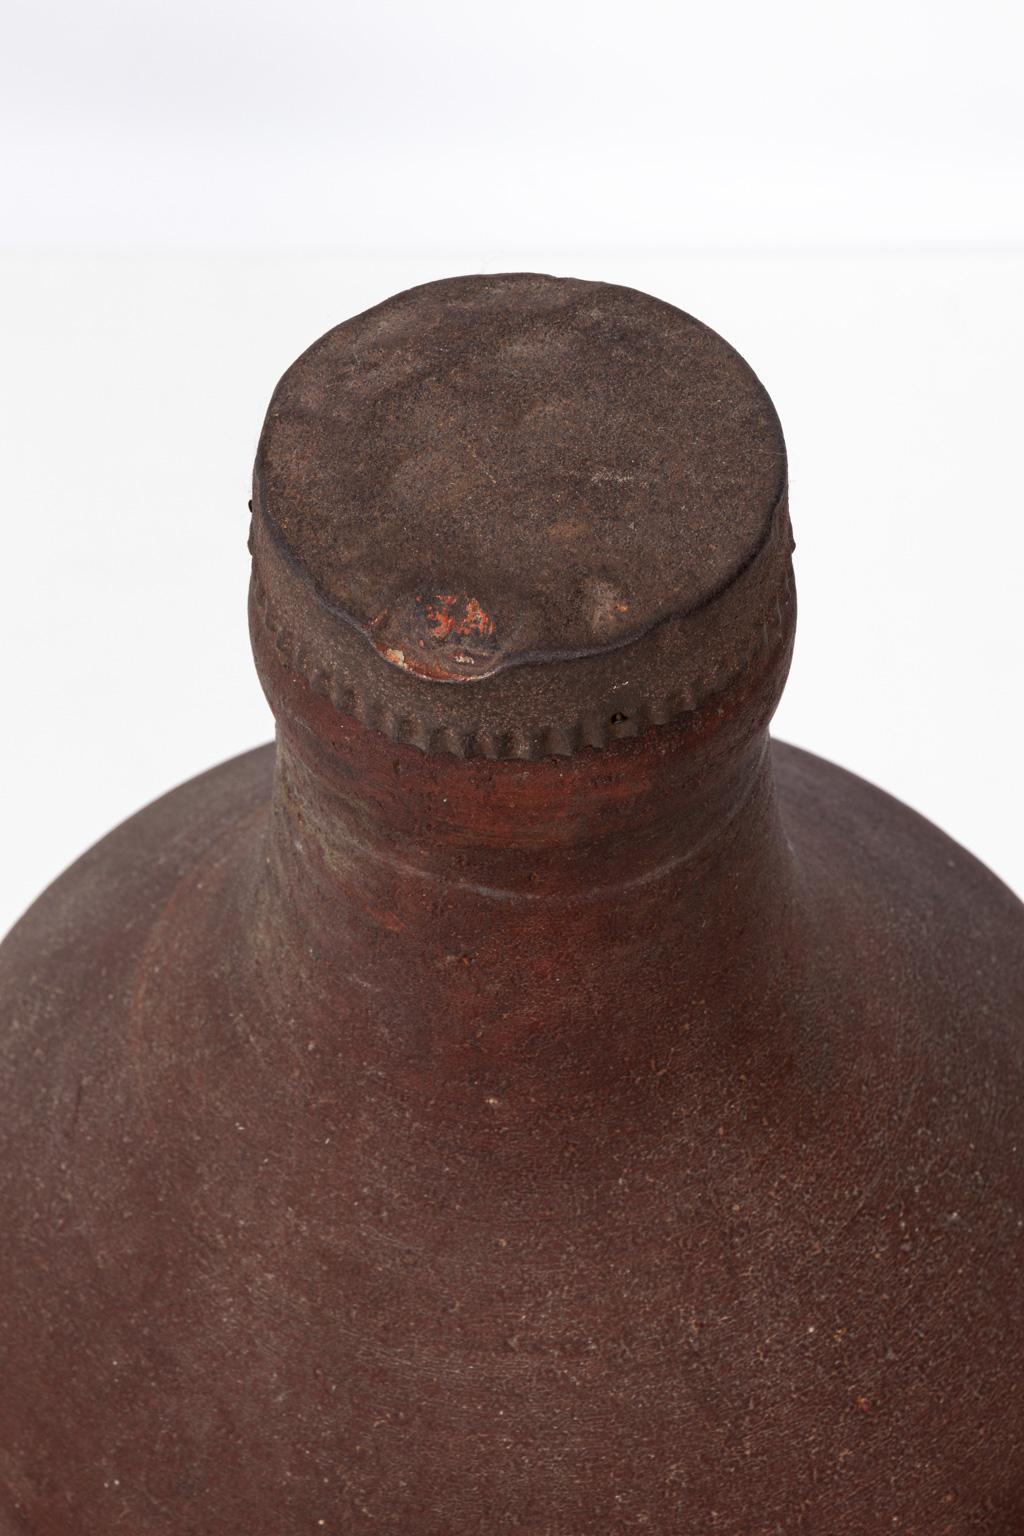 Large fiber composition Moxie store display bottle with metal cap, circa 1900s-1920s. Displayed in a general store to advertise Moxie Nerve Drink. Made in the United States. Please note of minor chips on the base and discoloration due to wear with